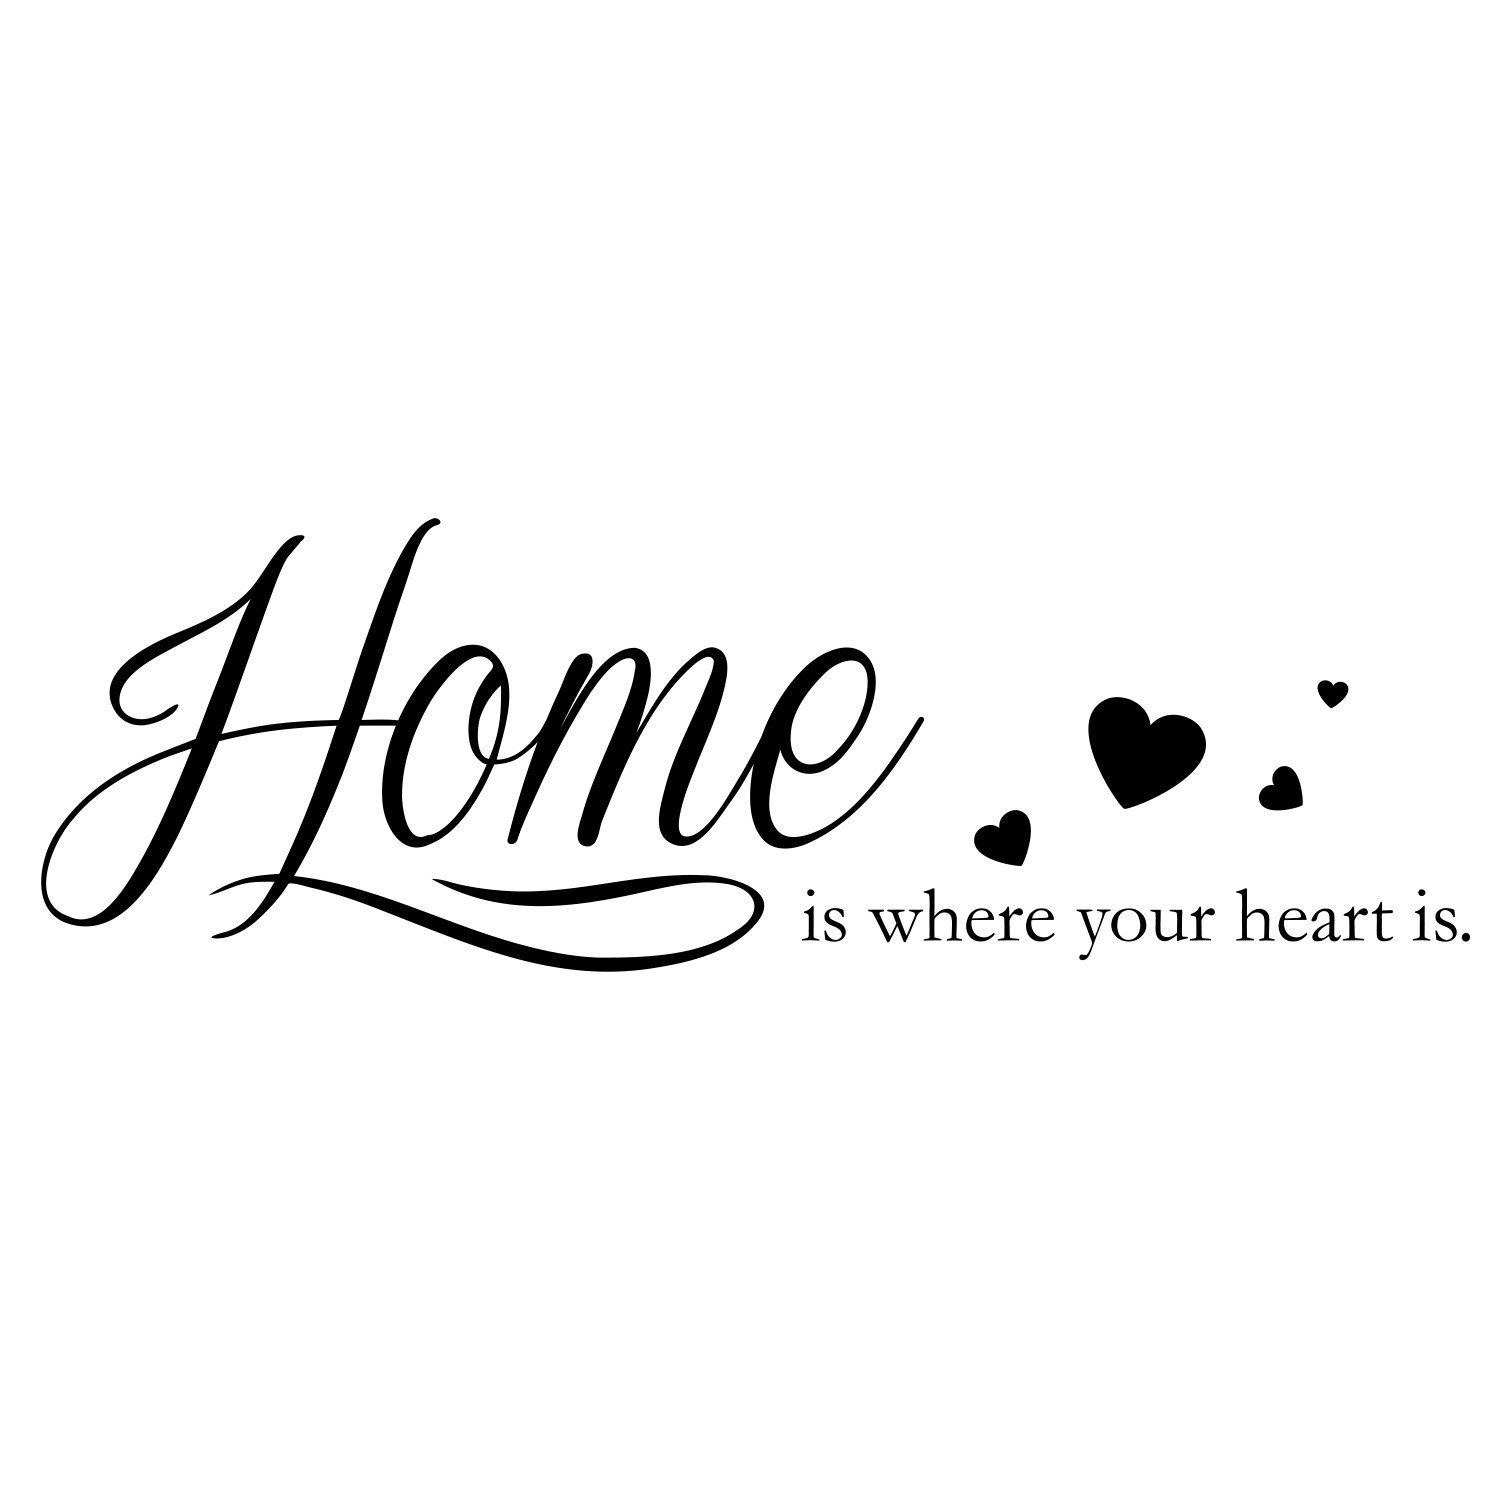 queence Wandtattoo Home ist where your heart is., 120 x 30 cm